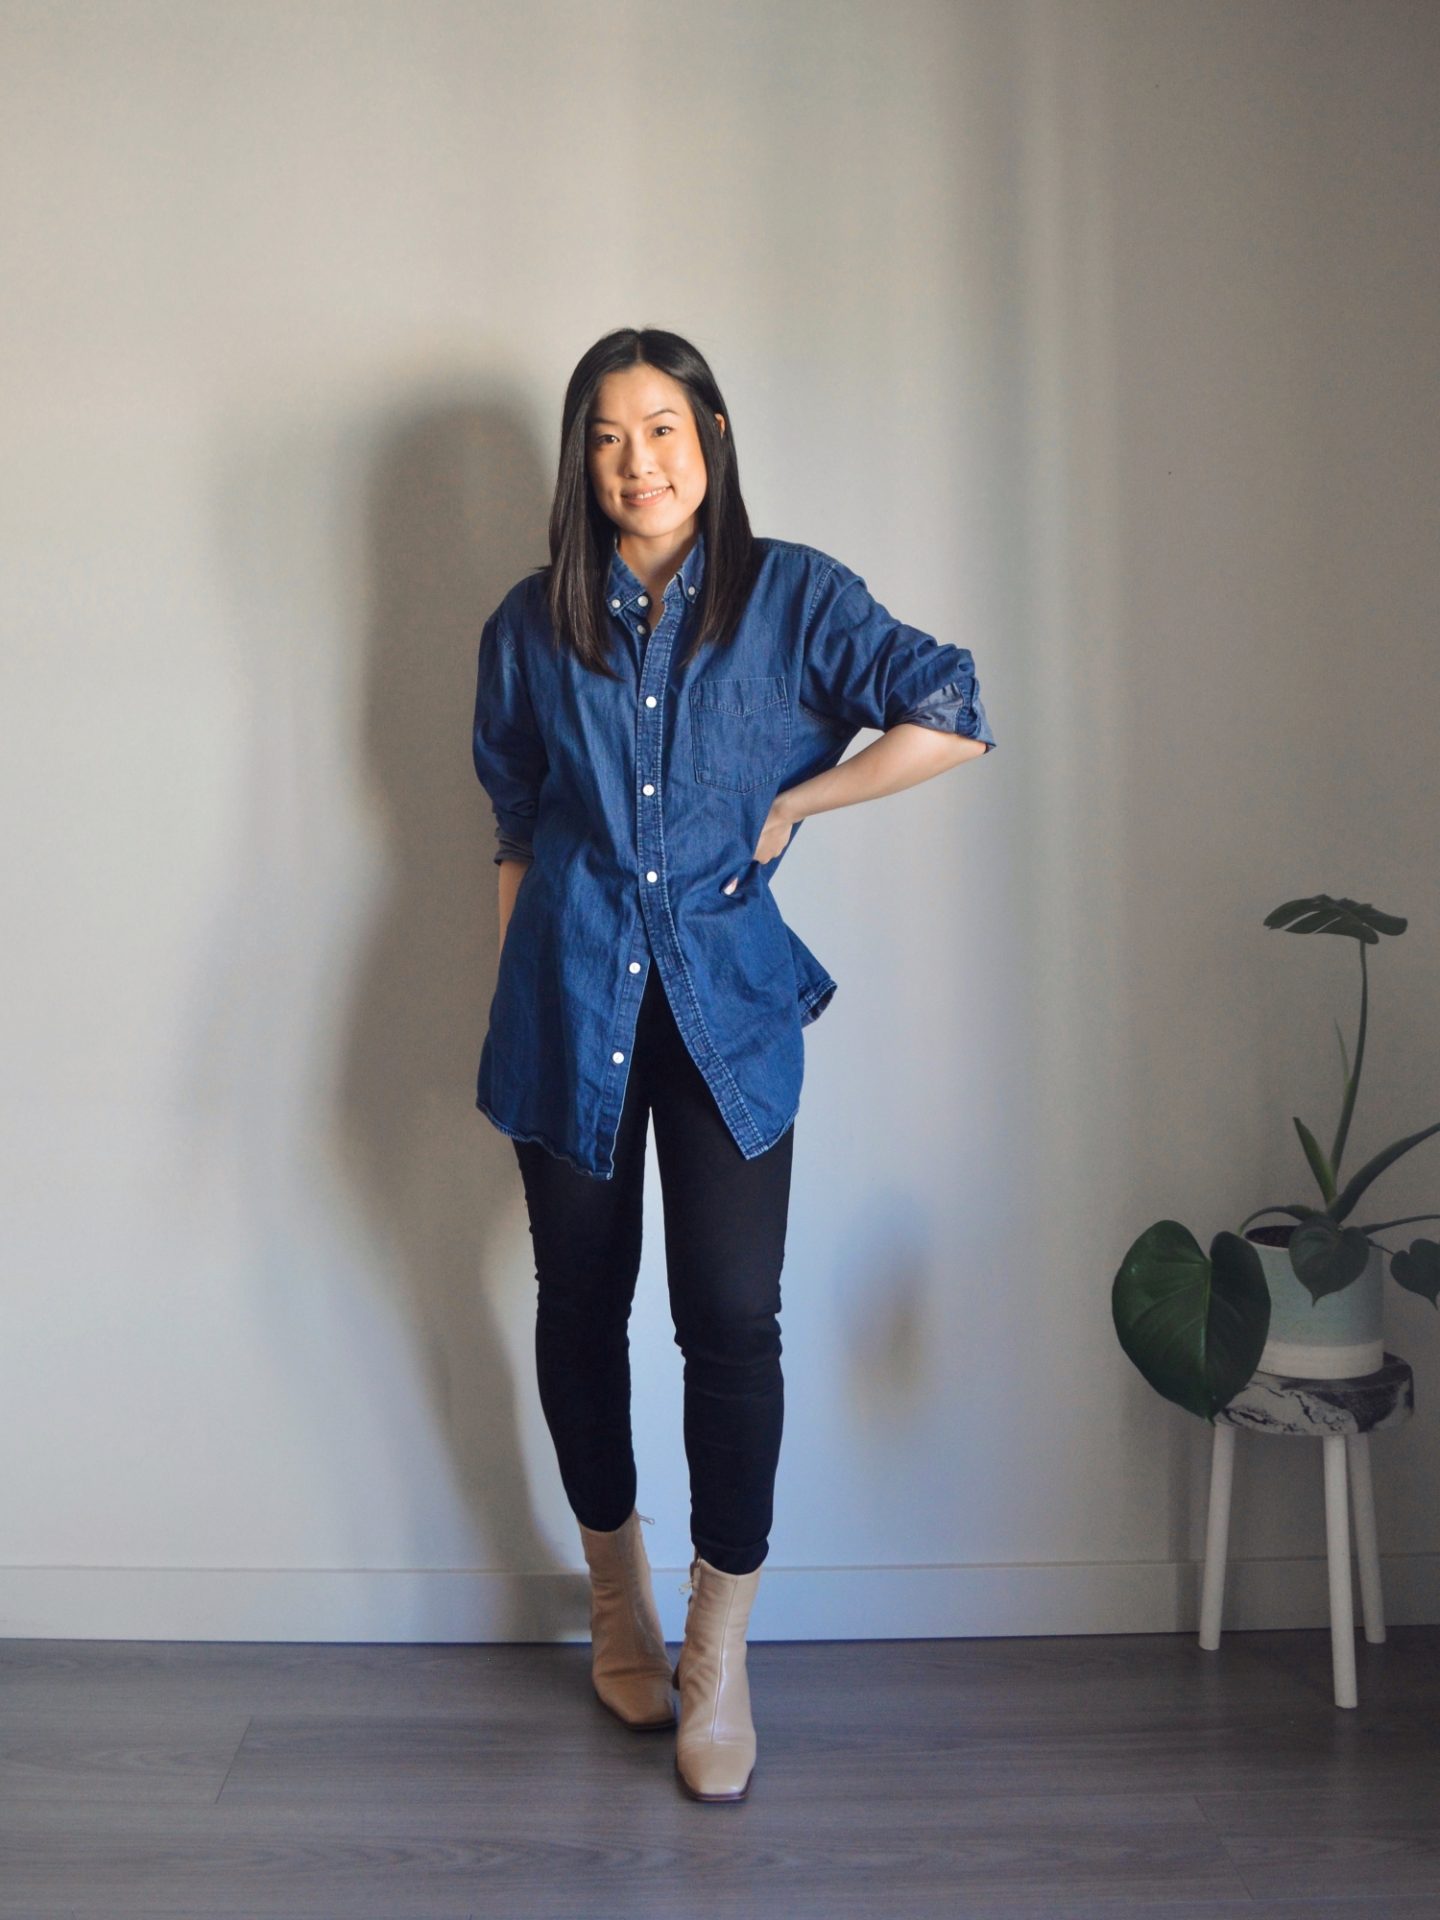 Outfit details: oversized denim shirt, black skinny jeans, nude ankle boots